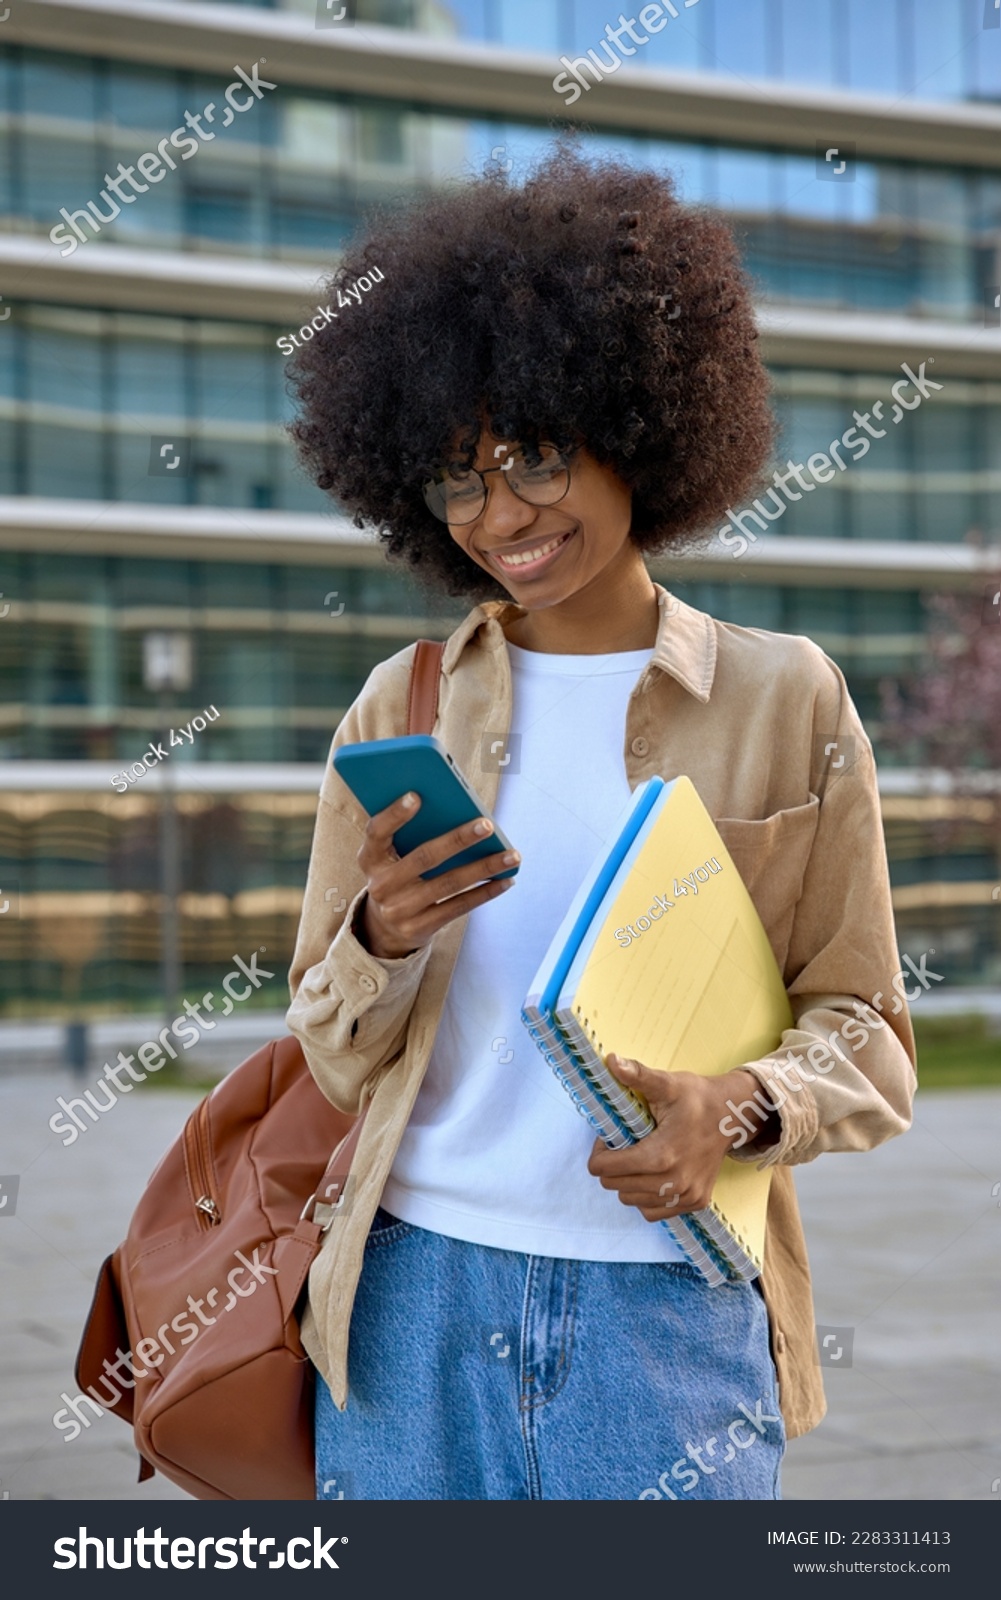 Vertical portrait of happy African American student girl enjoy online communication, hold exercise books with a backpack, scroll social media app on cell phone device on university campus background. #2283311413